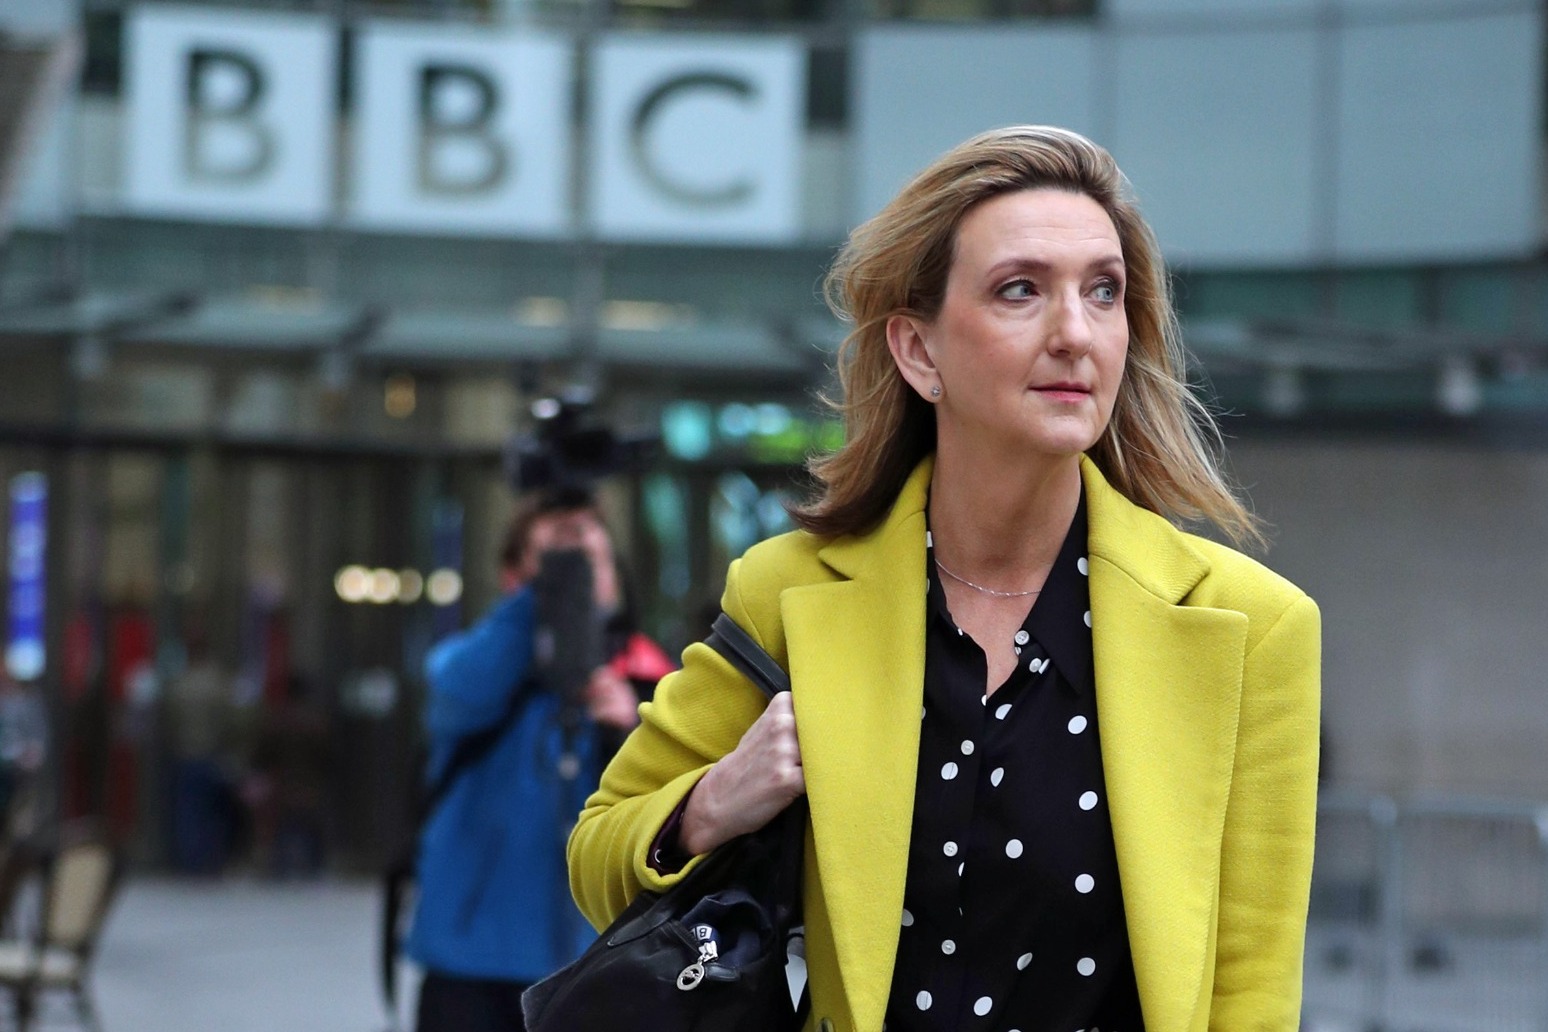 Victoria Derbyshire reassures cancer sufferers of NHS ‘expertise and compassion’ 